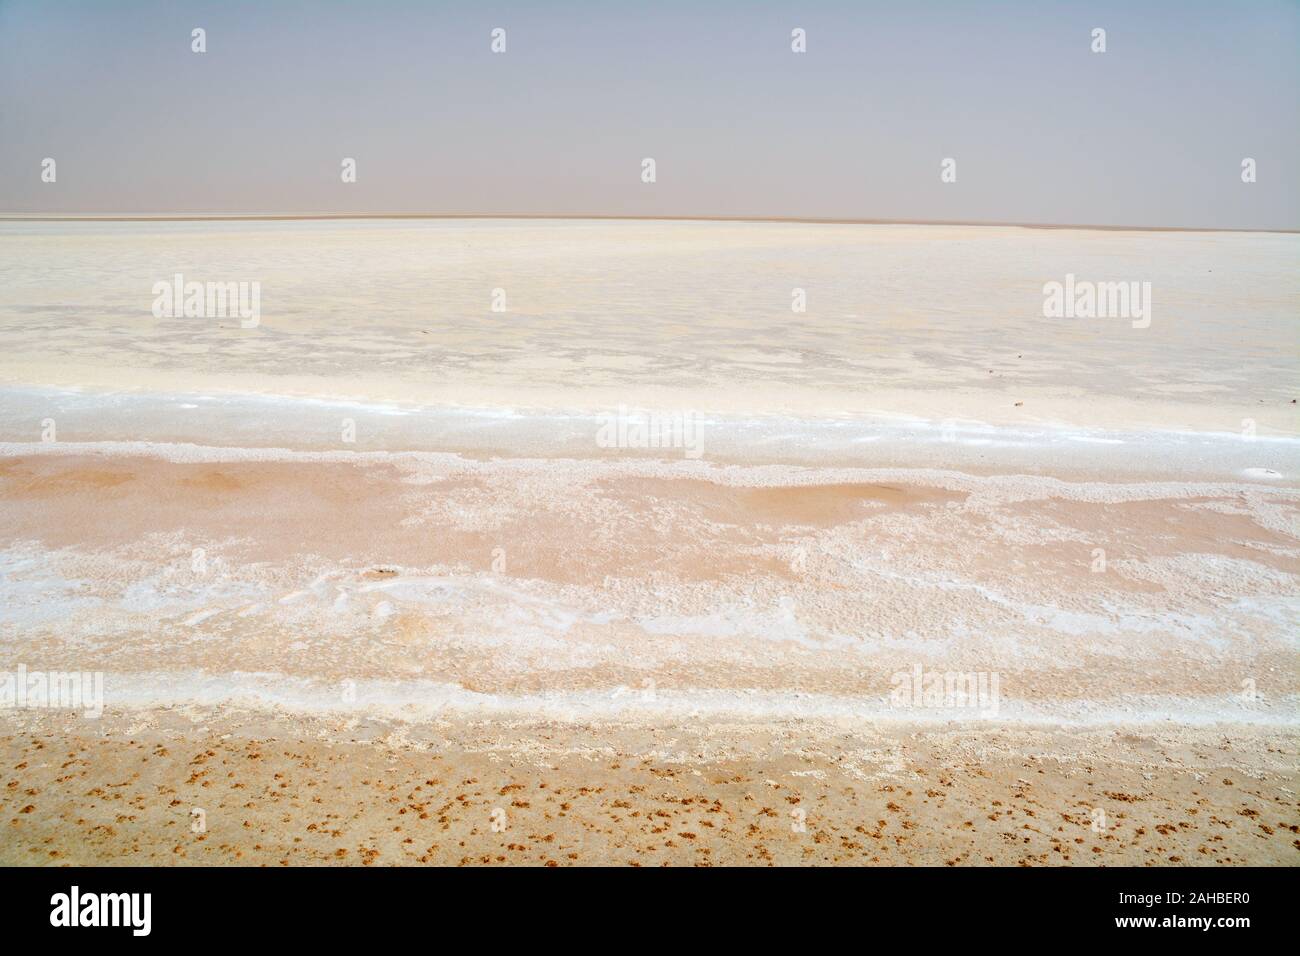 The flat and dry exposed lake bed of the Chott el Djerid salt lake near the town of Tozeur in the Sahara Desert of southern Tunisia, North Africa. Stock Photo